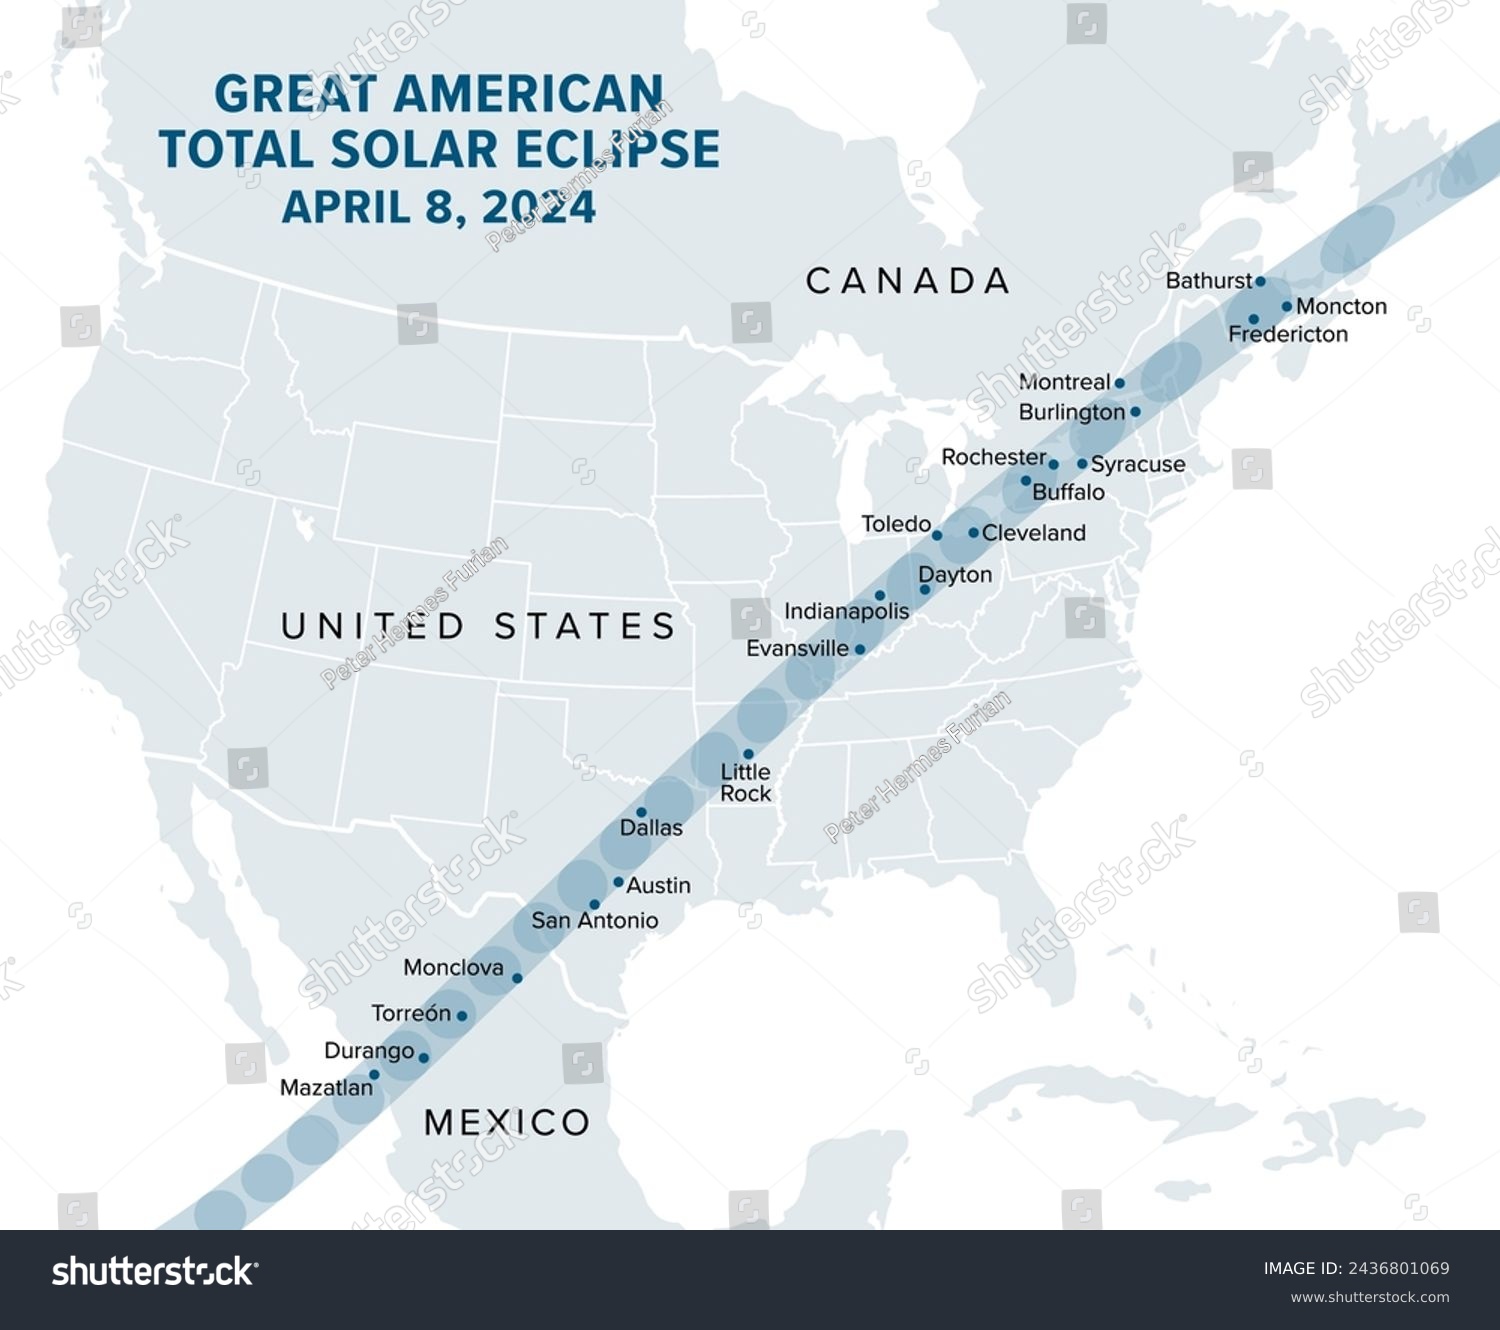 SVG of Great American Total Solar Eclipse, on April 8, 2024, political map. Major cities in the path of totality, visible across North America, passing over Mexico, the United States, and Canada. Vector. svg